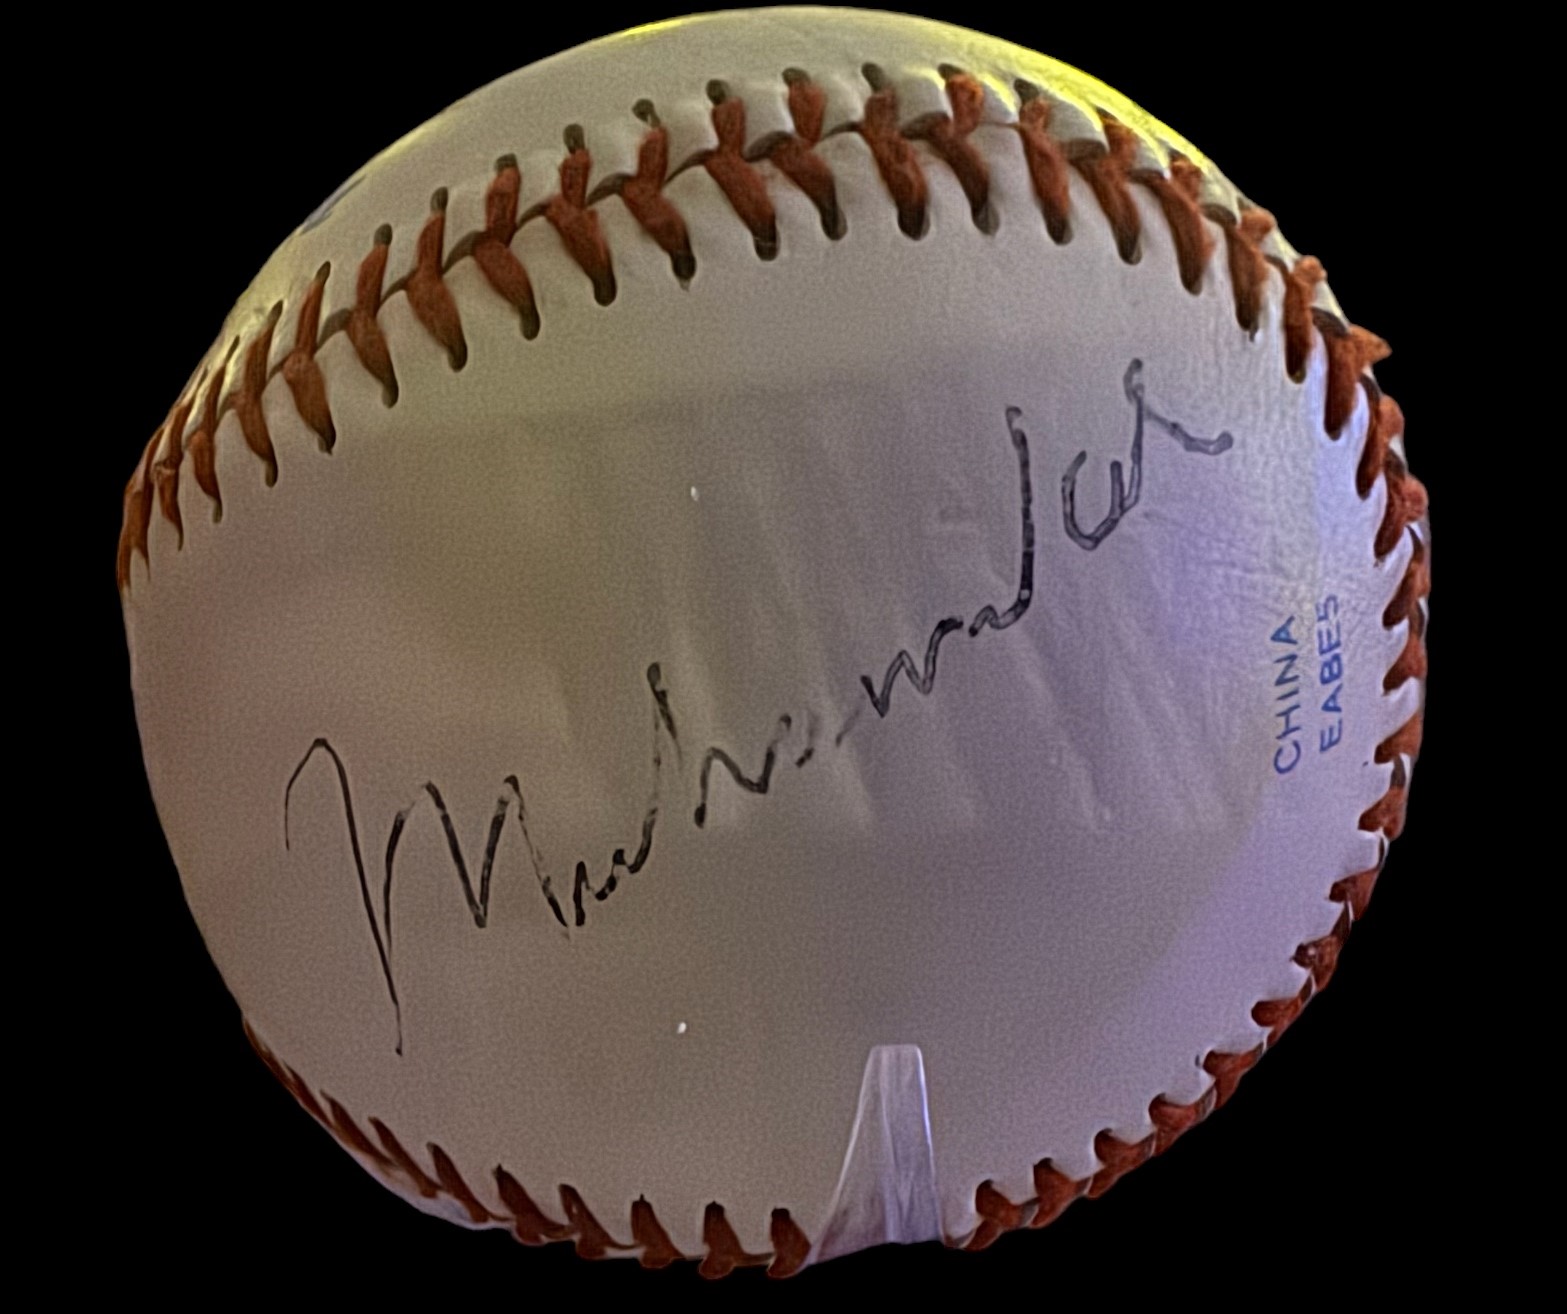 Muhammad Ali signed baseball in display case. January 17, 1942 – June 3, 2016) was an American